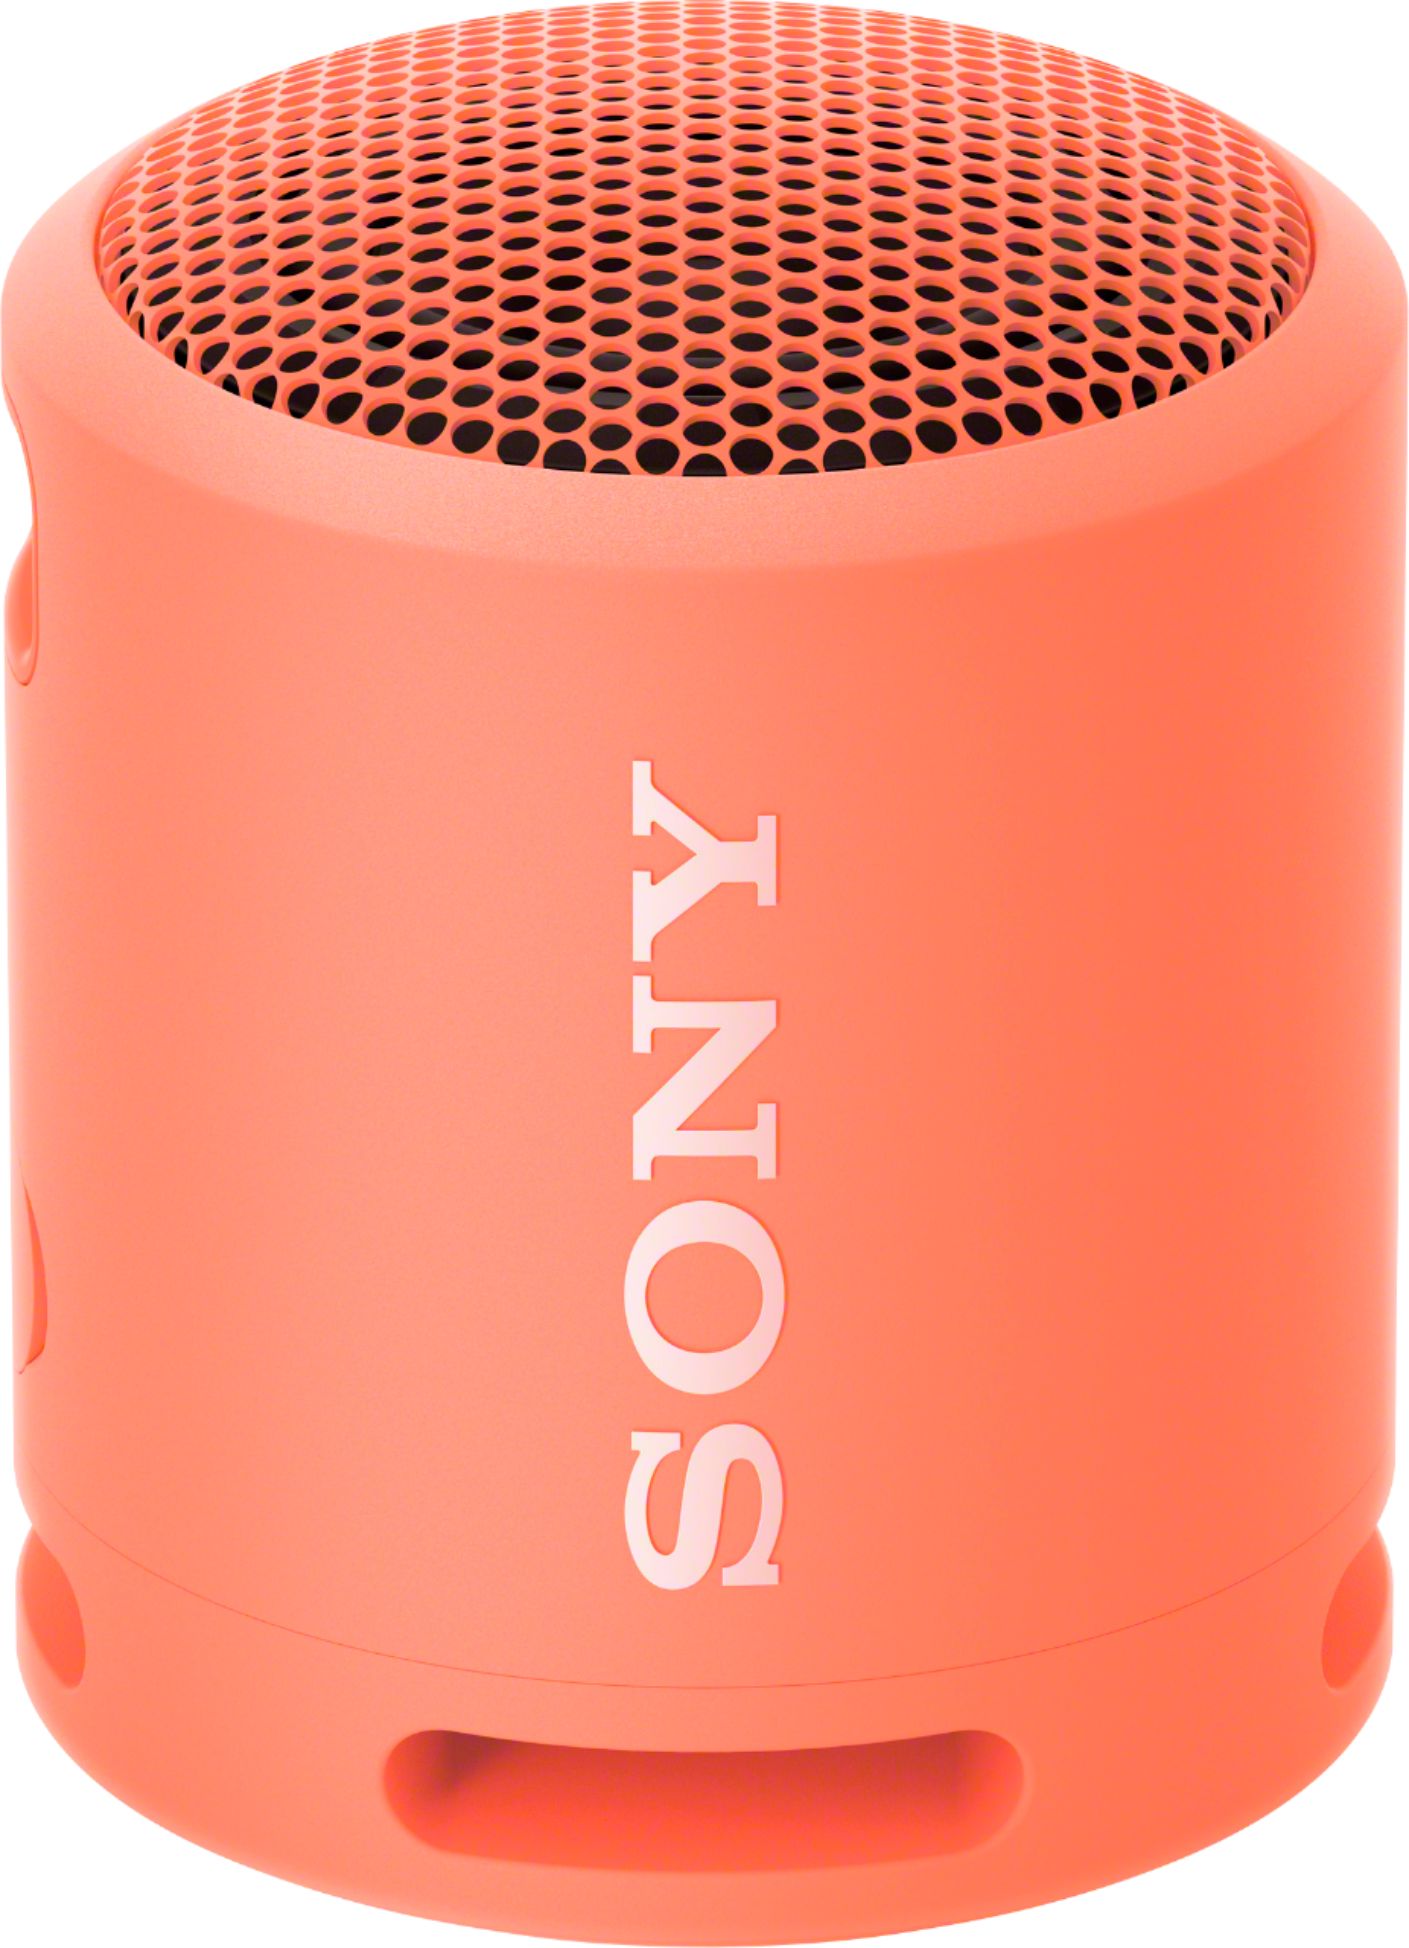 Angle View: Sony SRSXB13P XB13 Extra Bass Compact Bluetooth Speaker - Coral Pink